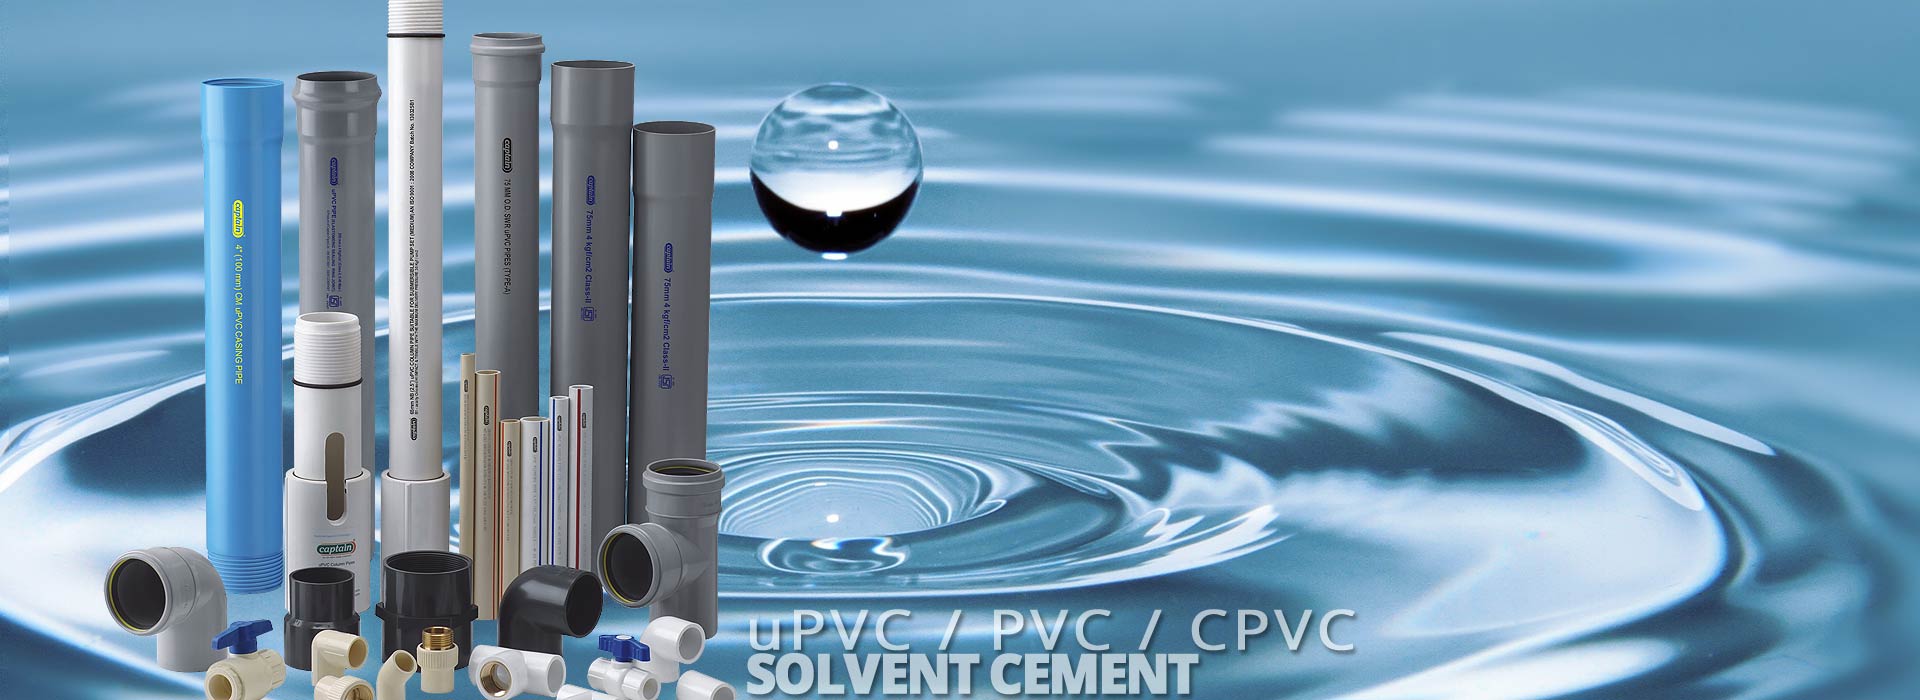 uPVC / PVC / CPVC Solvent Cement from Captain Pipes Ltd.